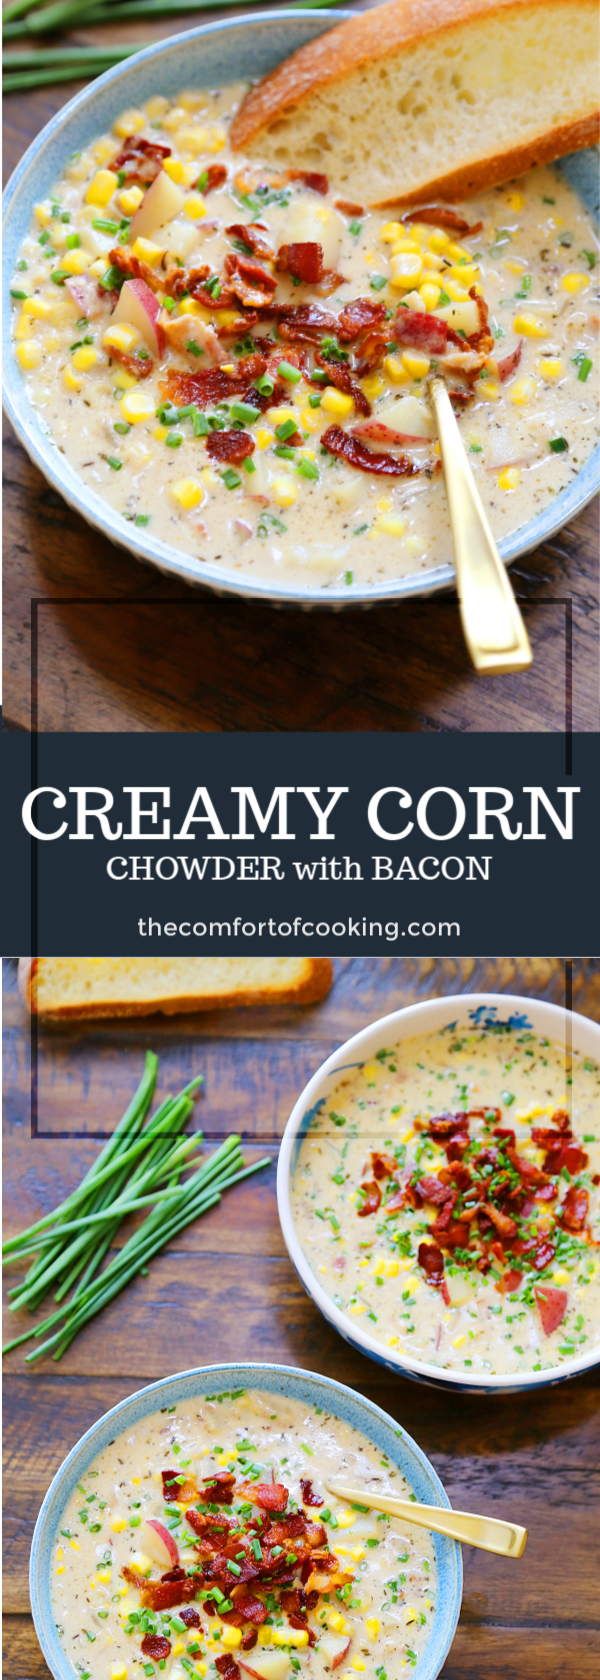 Creamy Corn Chowder with Bacon - Cozy, delicious 30-minute meal. Quick + easy in one pot! thecomfortofcooking.com